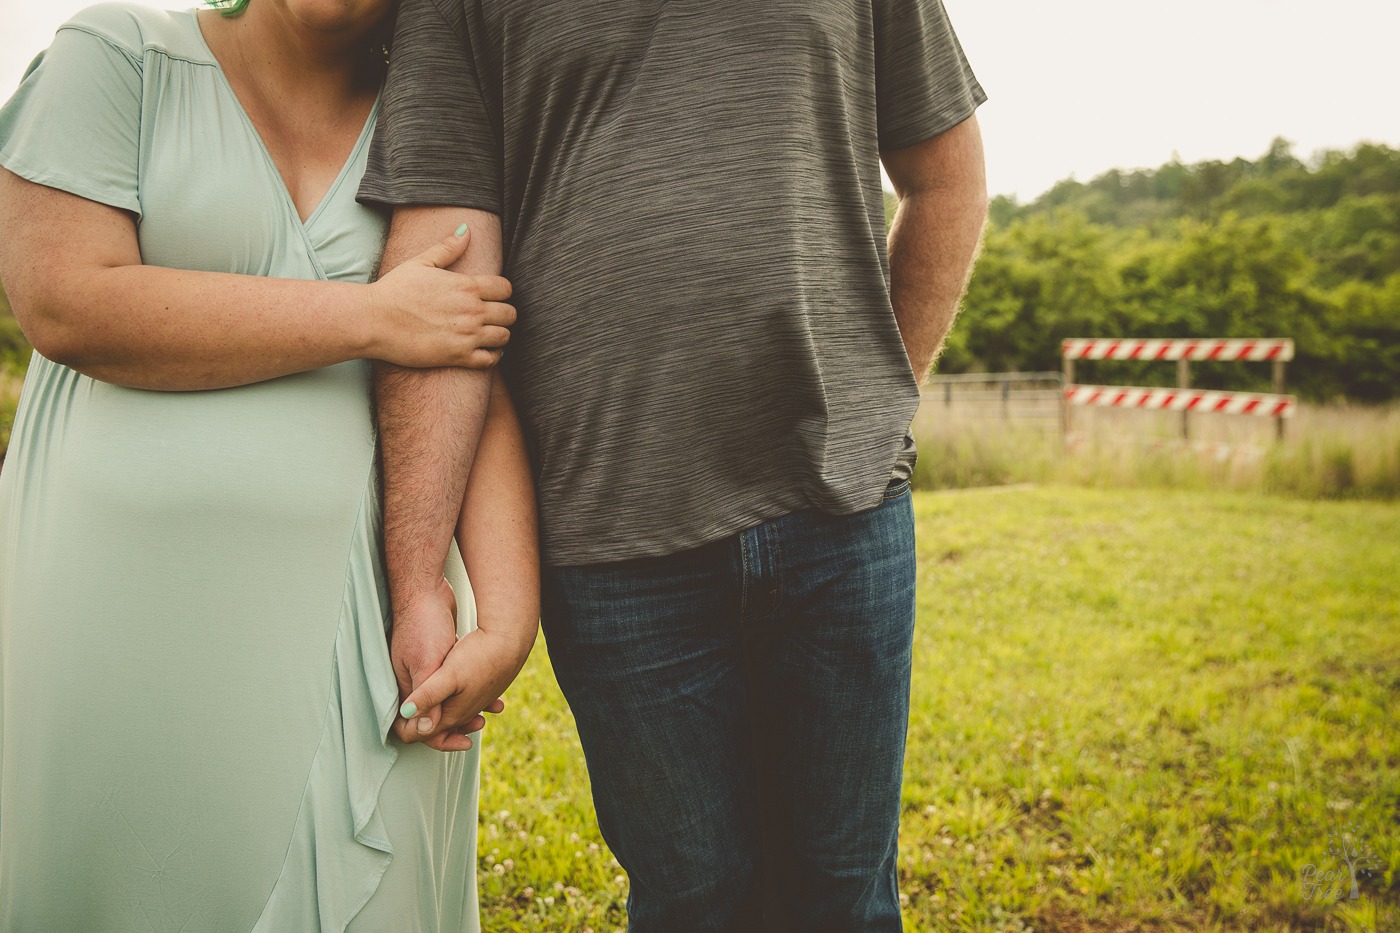 Photograph of pregnant couple leaning on each other with arms intertwined. Their faces can not be seen